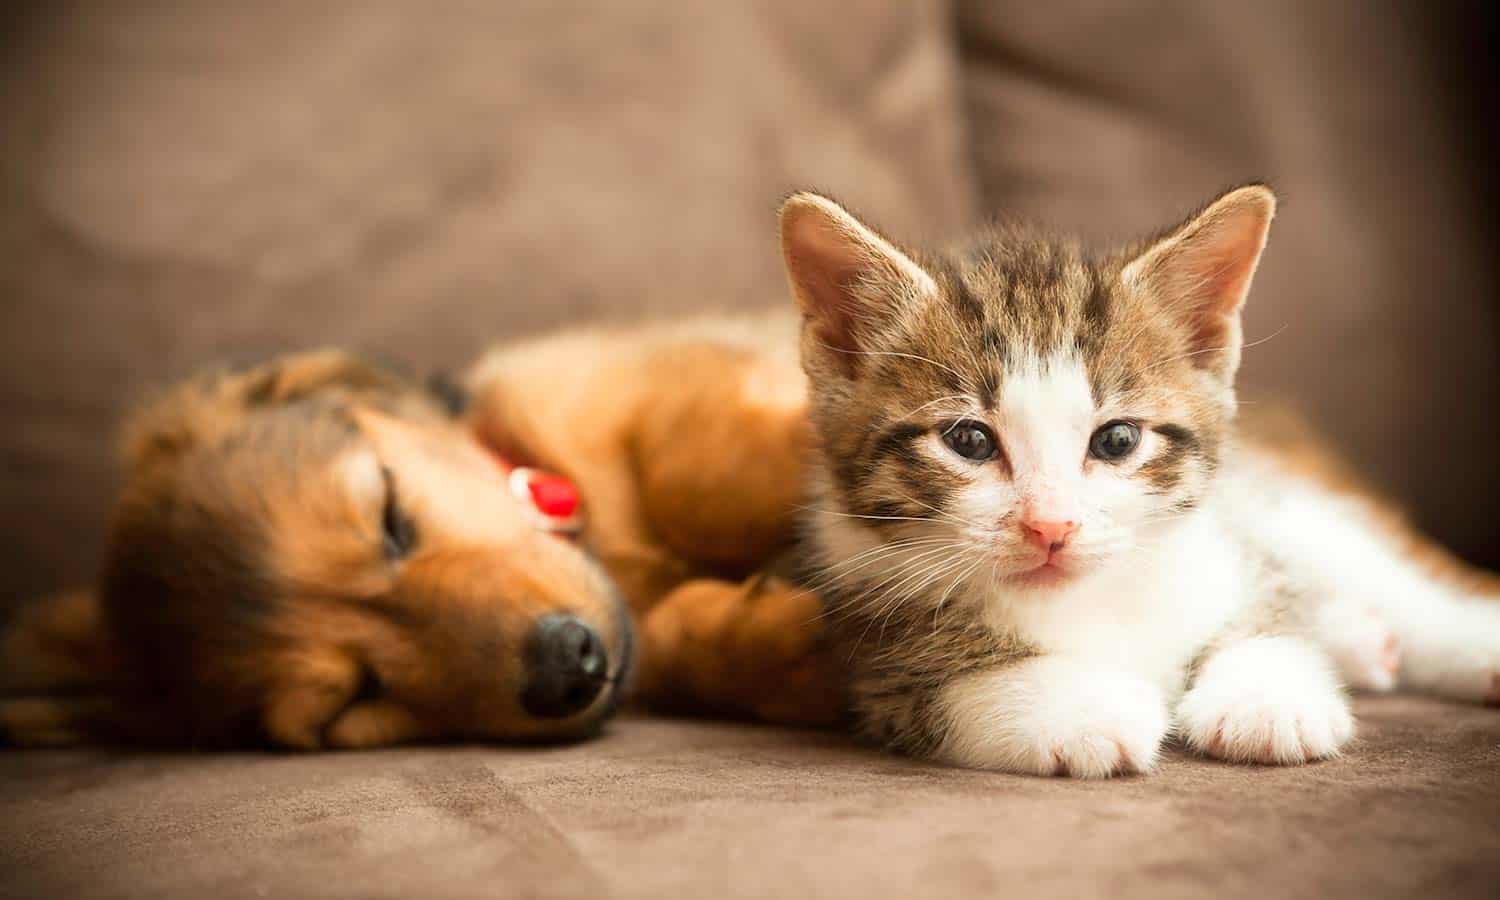 A kitten and puppy